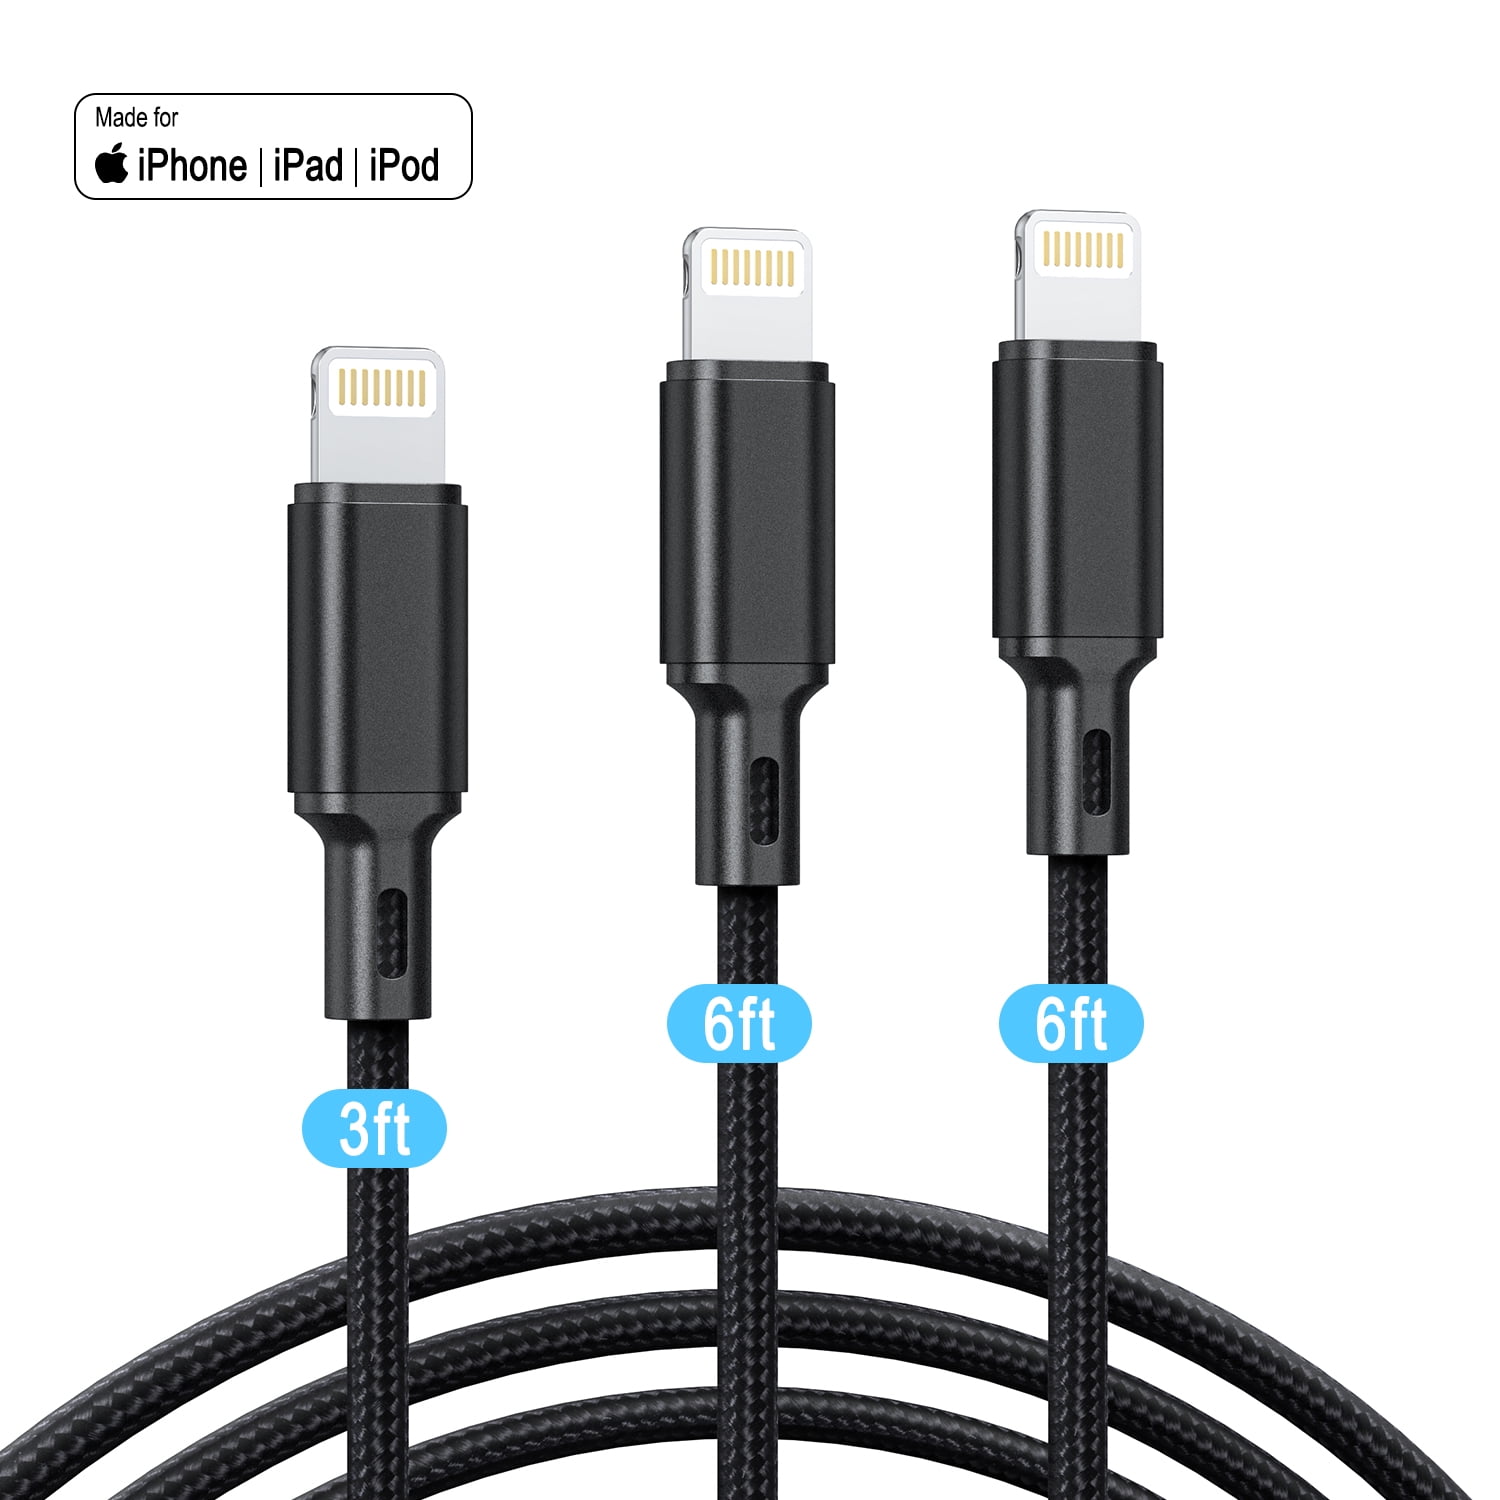 Beware of Apple's new braided USB-C 1m cables from iPad Pro doesn